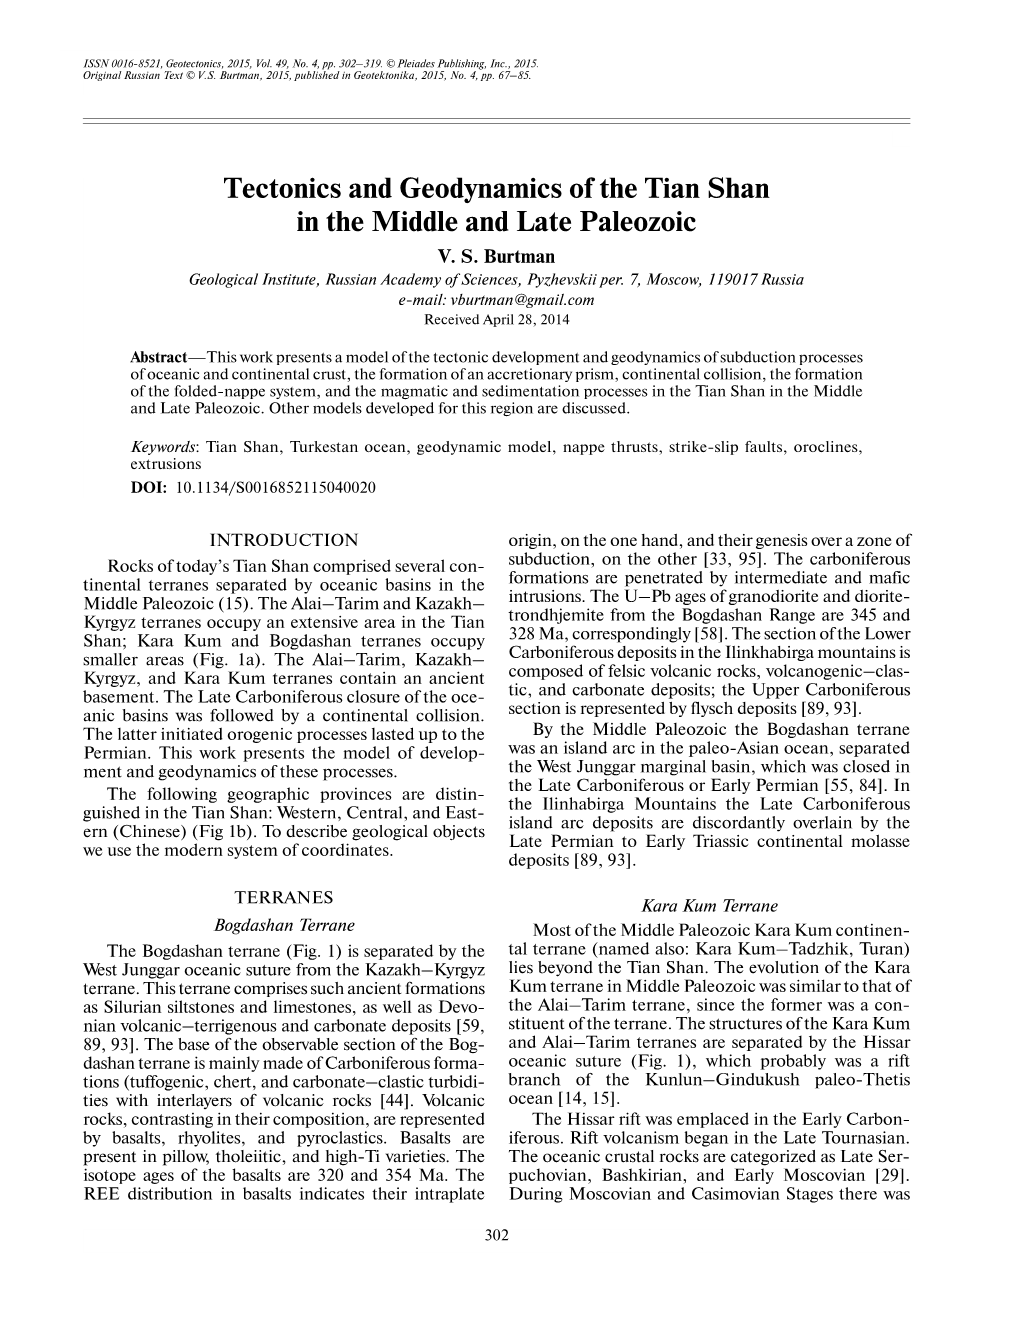 Tectonics and Geodynamics of the Tian Shan in the Middle and Late Paleozoic V